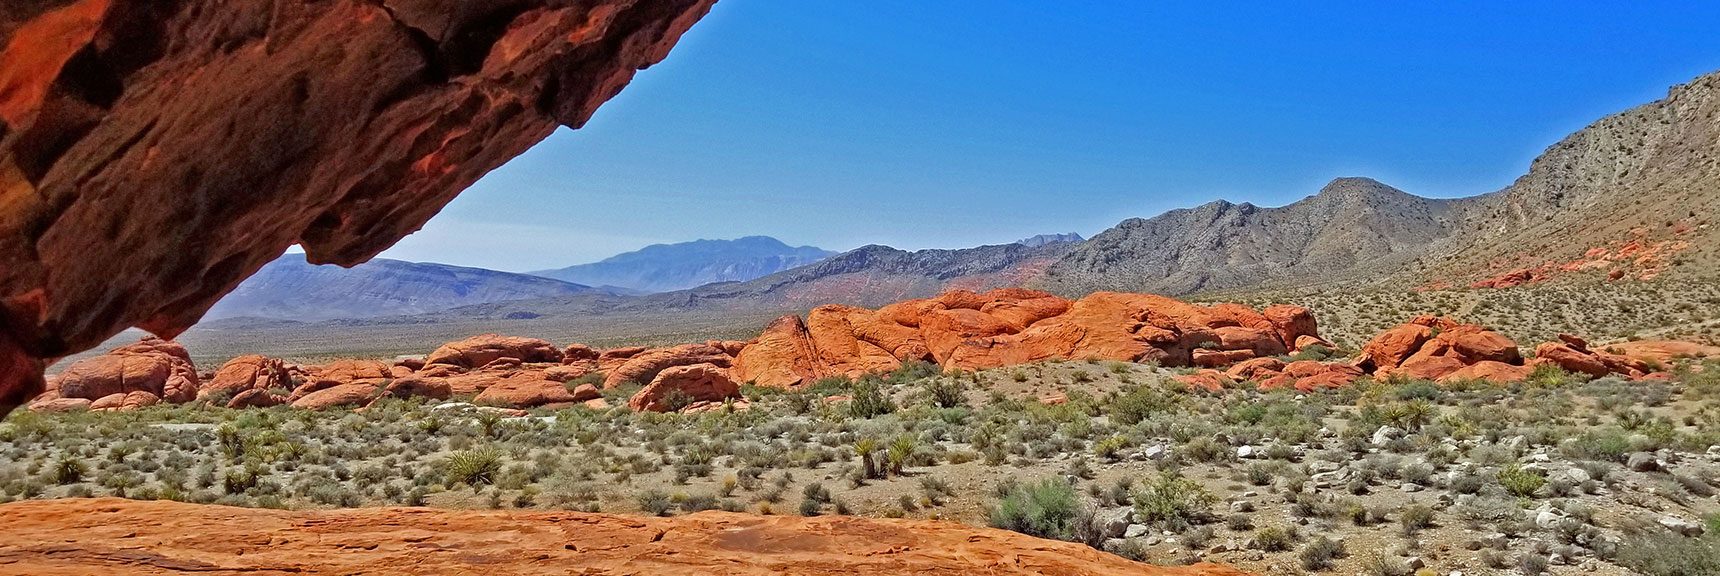 View from Alcove in Red Rocks Toward Potosi Mountain in Distances | Little Red Rock Las Vegas, Nevada, Near La Madre Mountains Wilderness